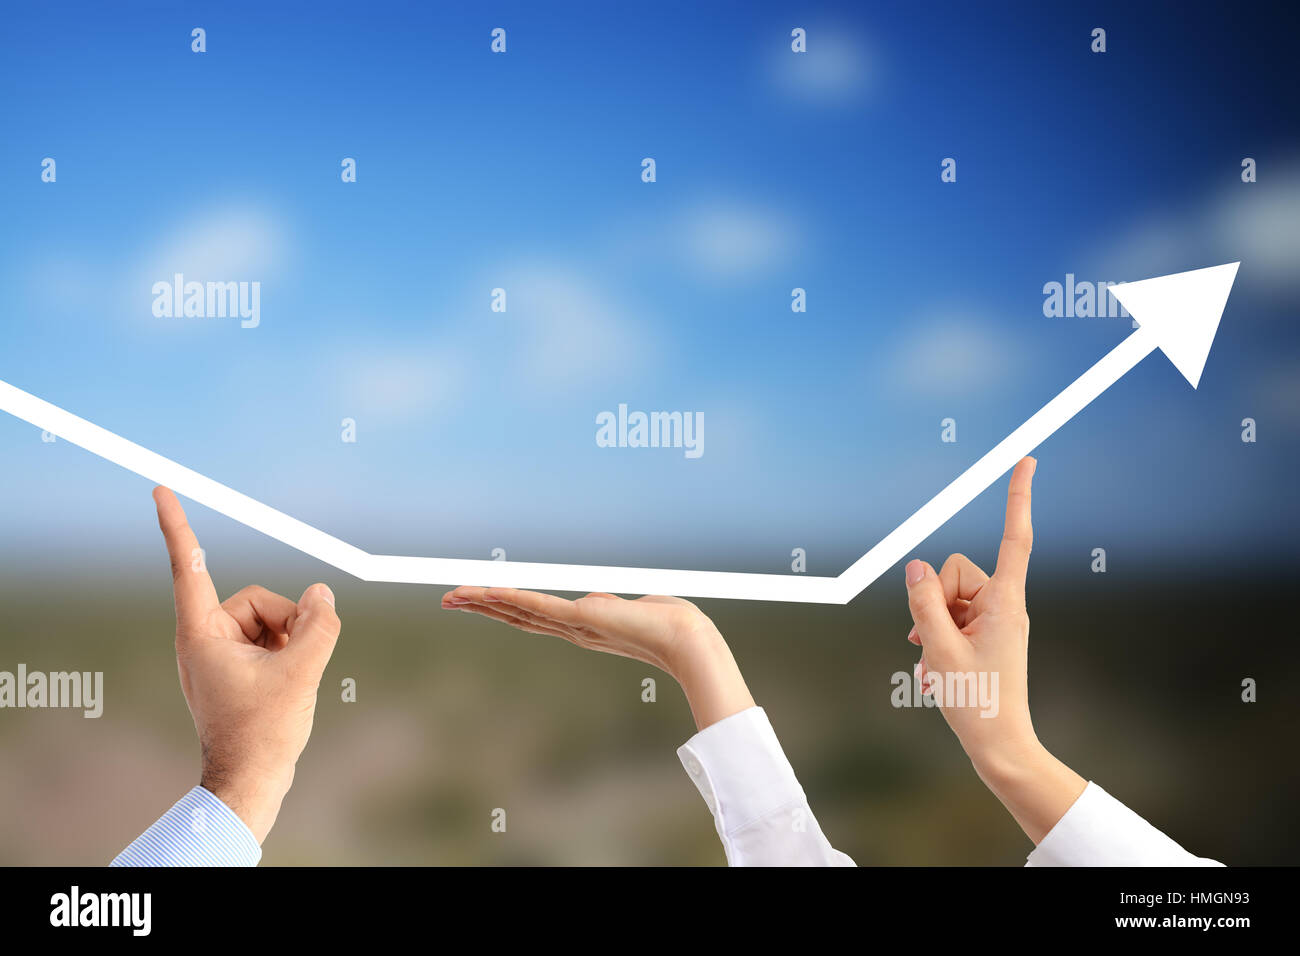 Business people’s hands holding an up going arrow suggesting the benefits of teamwork on an agricultural field background Stock Photo